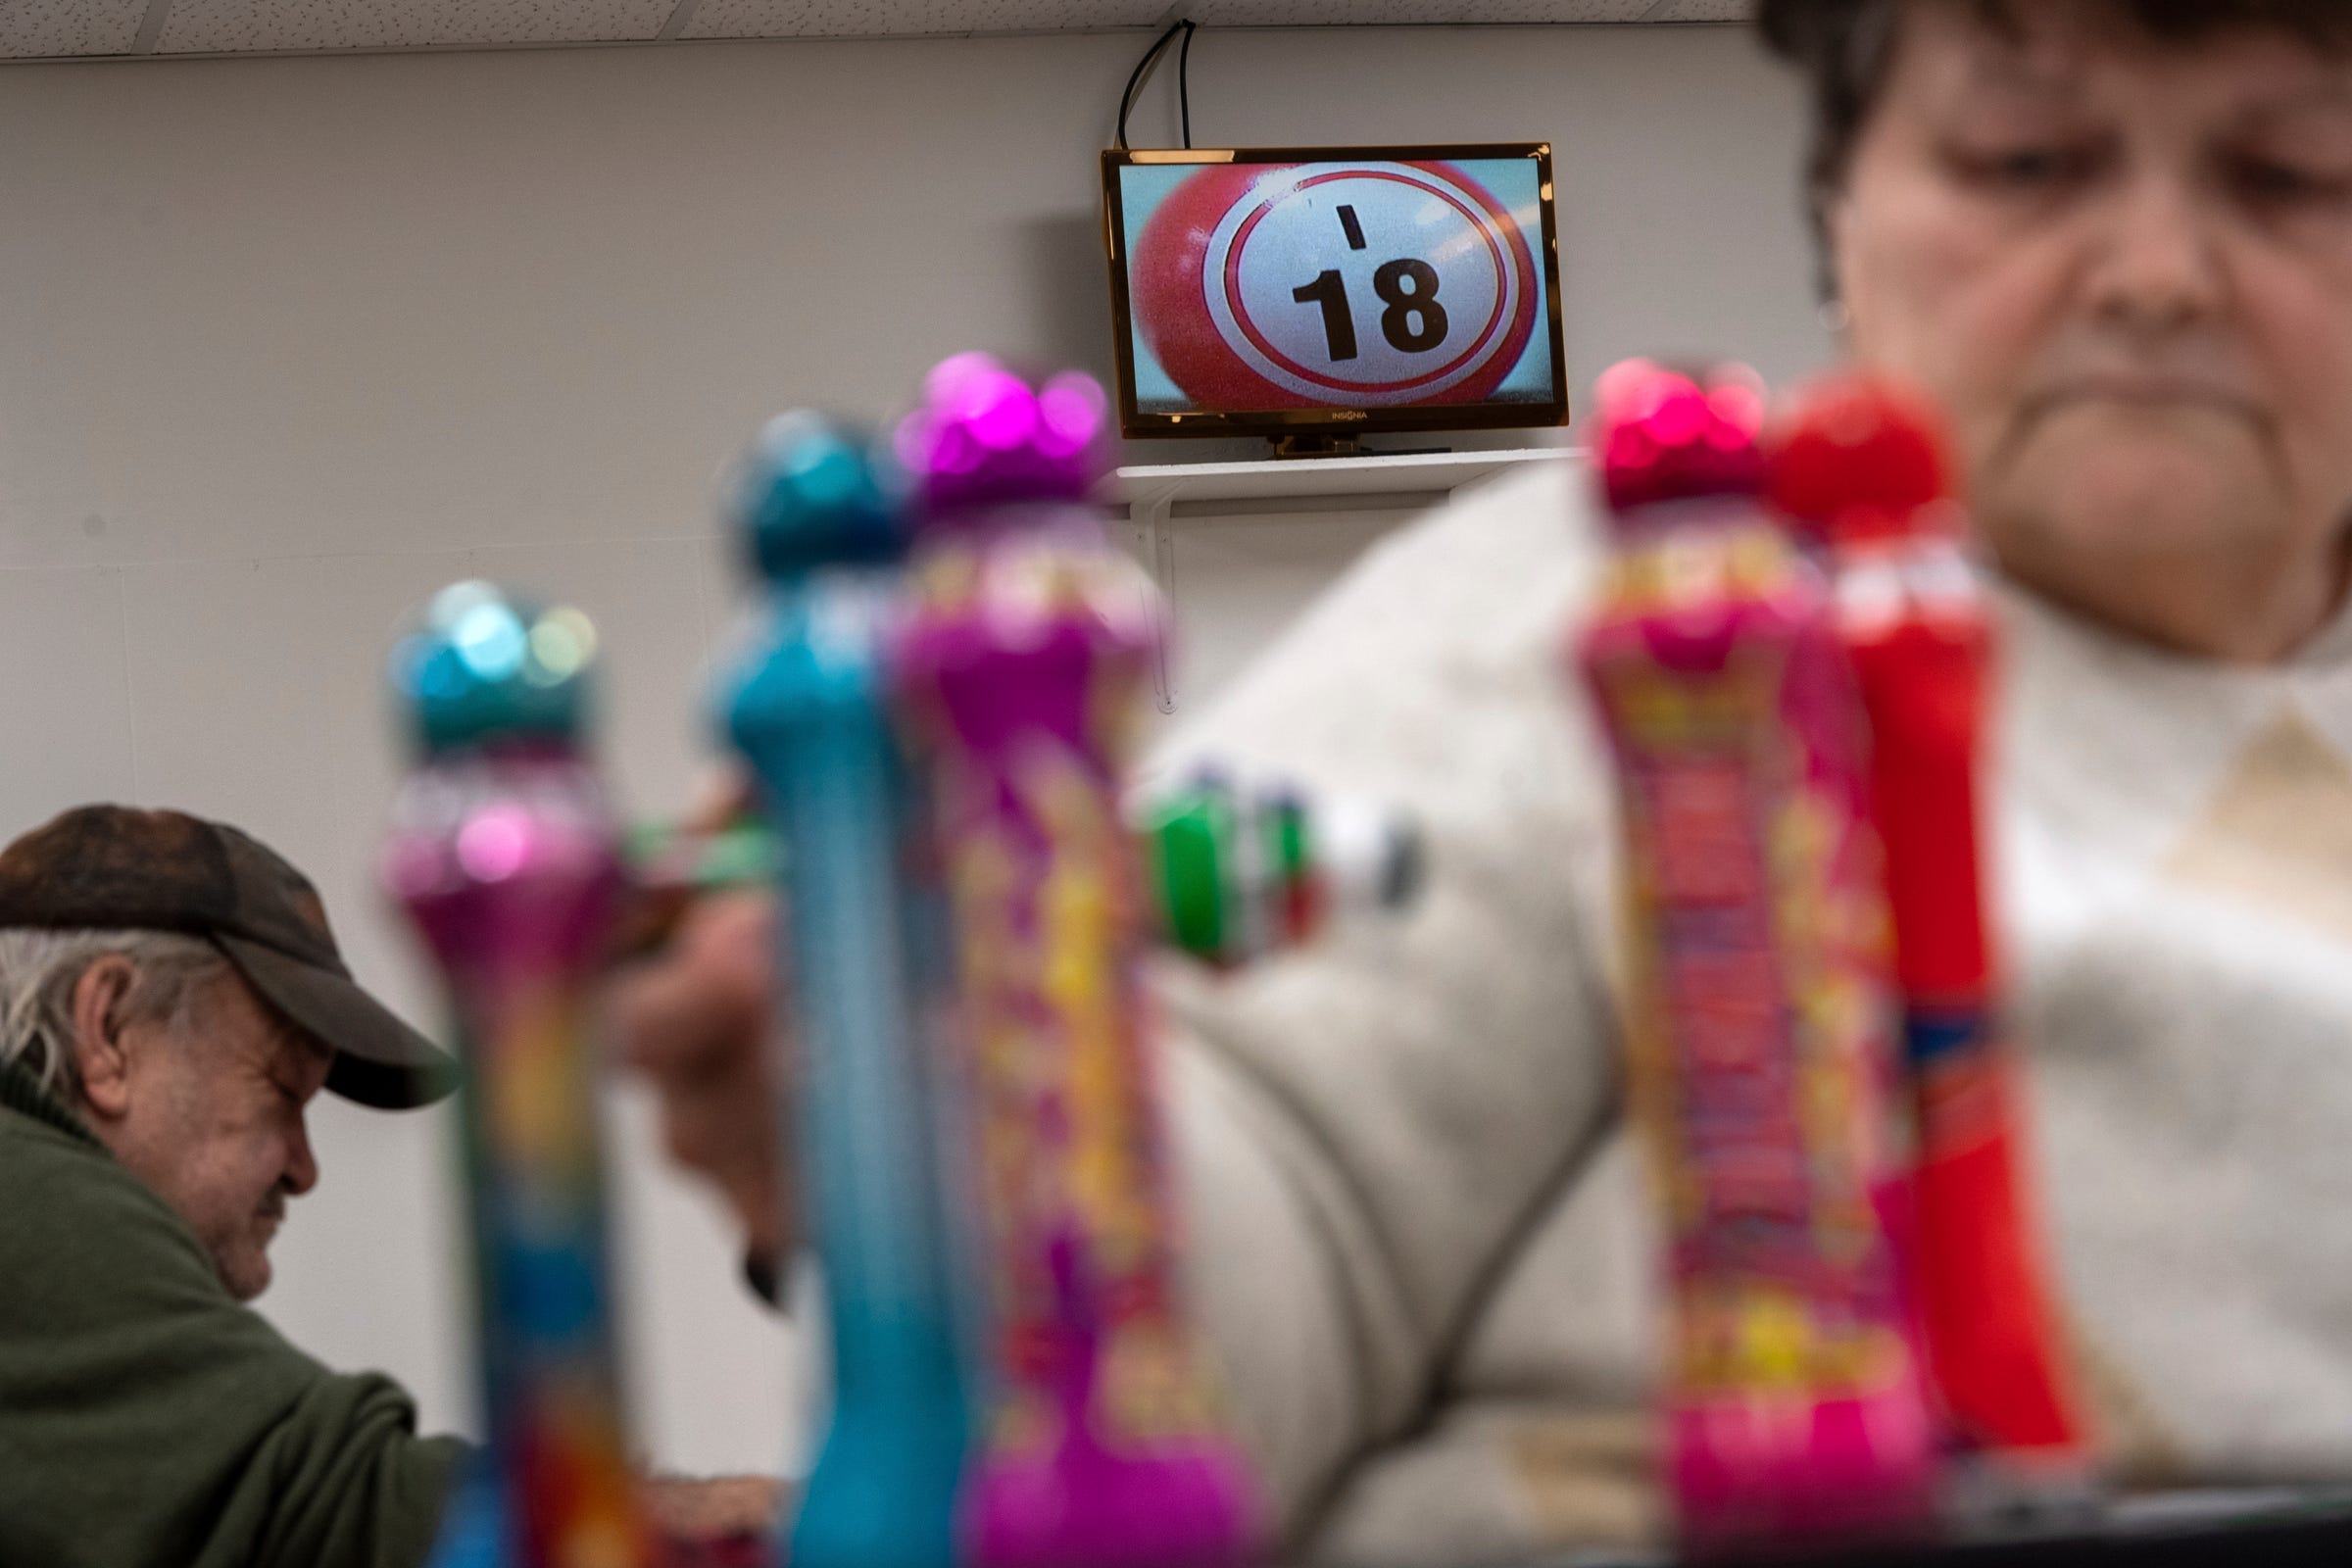 Bingo balls that were drawn are shown on a monitor during bingo night at the Odd Fellows building in Ishpeming on Friday, Feb. 10, 2023, in Michigan's Upper Peninsula.